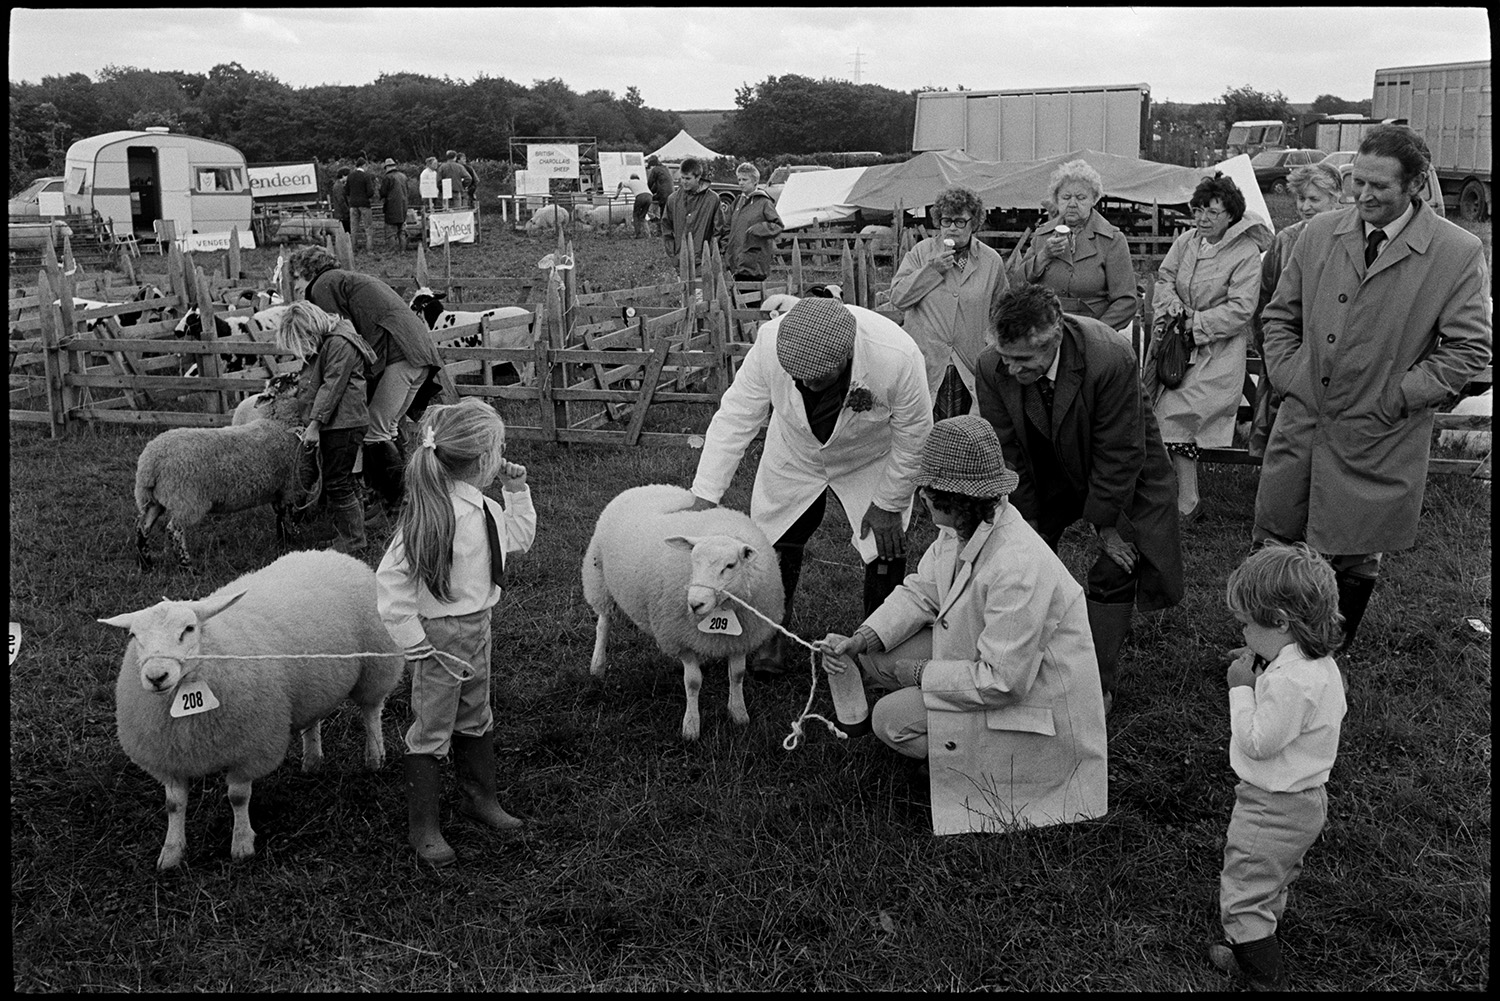 Agricultural show, judging sheep. Prize cattle in pens, spectators.
[People showing sheep at the North Devon Show near Alverdiscott. A young girl is holding a ewe with a holt. A small boy and other spectators look on as a judge examines a ewe. Sheep pens are lined up behind them, with two ladies eating ice creams. A caravan, lorries and other vehicles are in the background.]